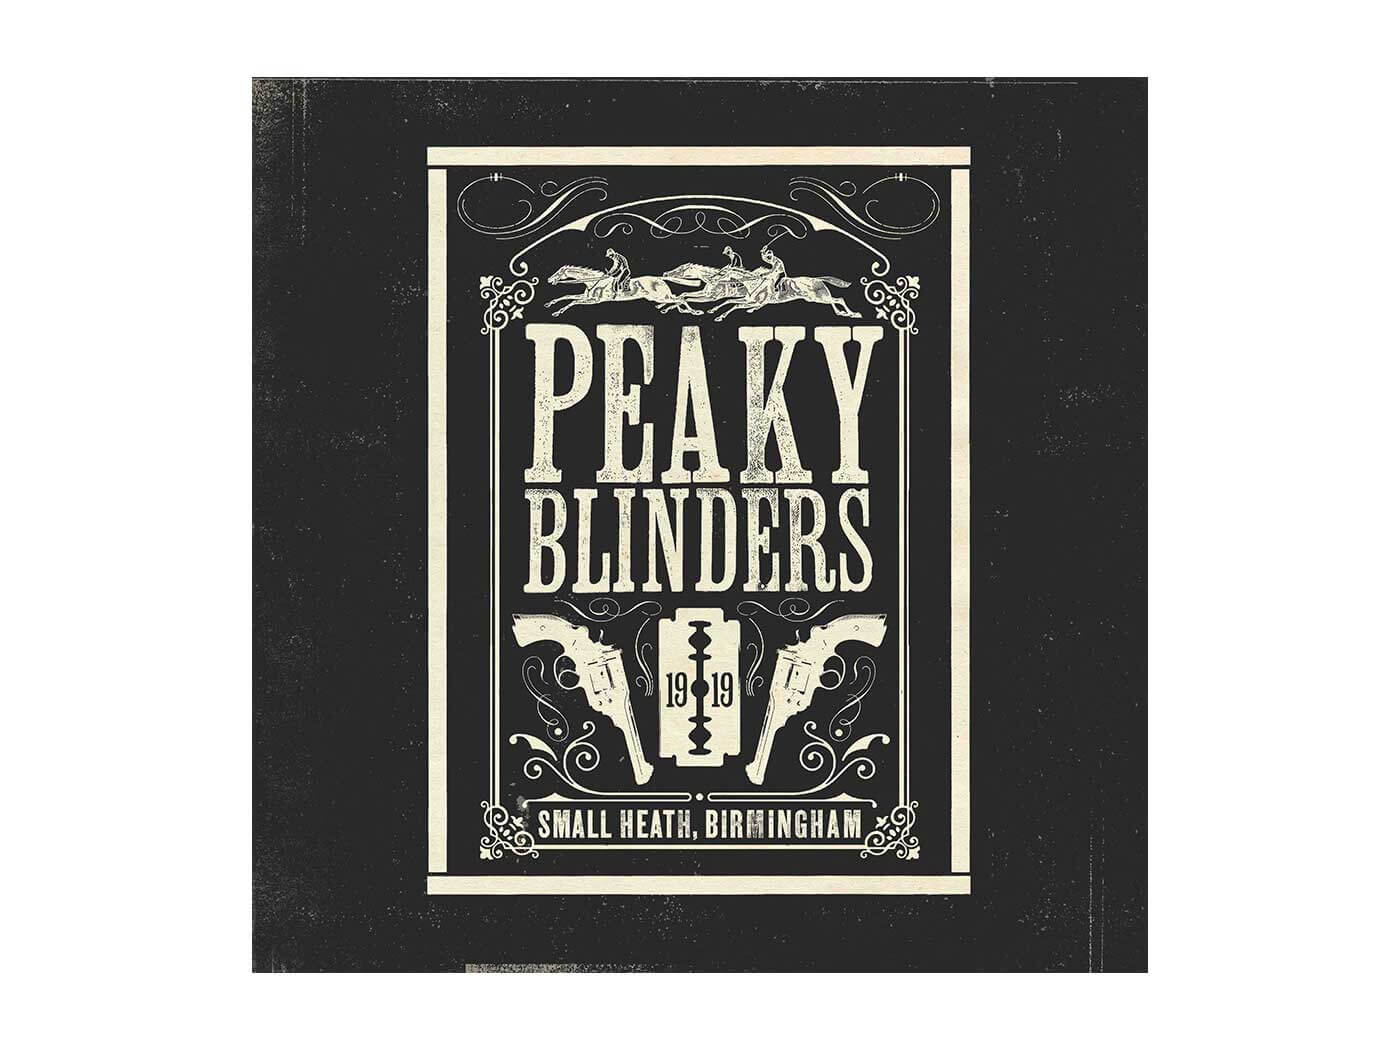 The Peaky Blinders Soundtrack